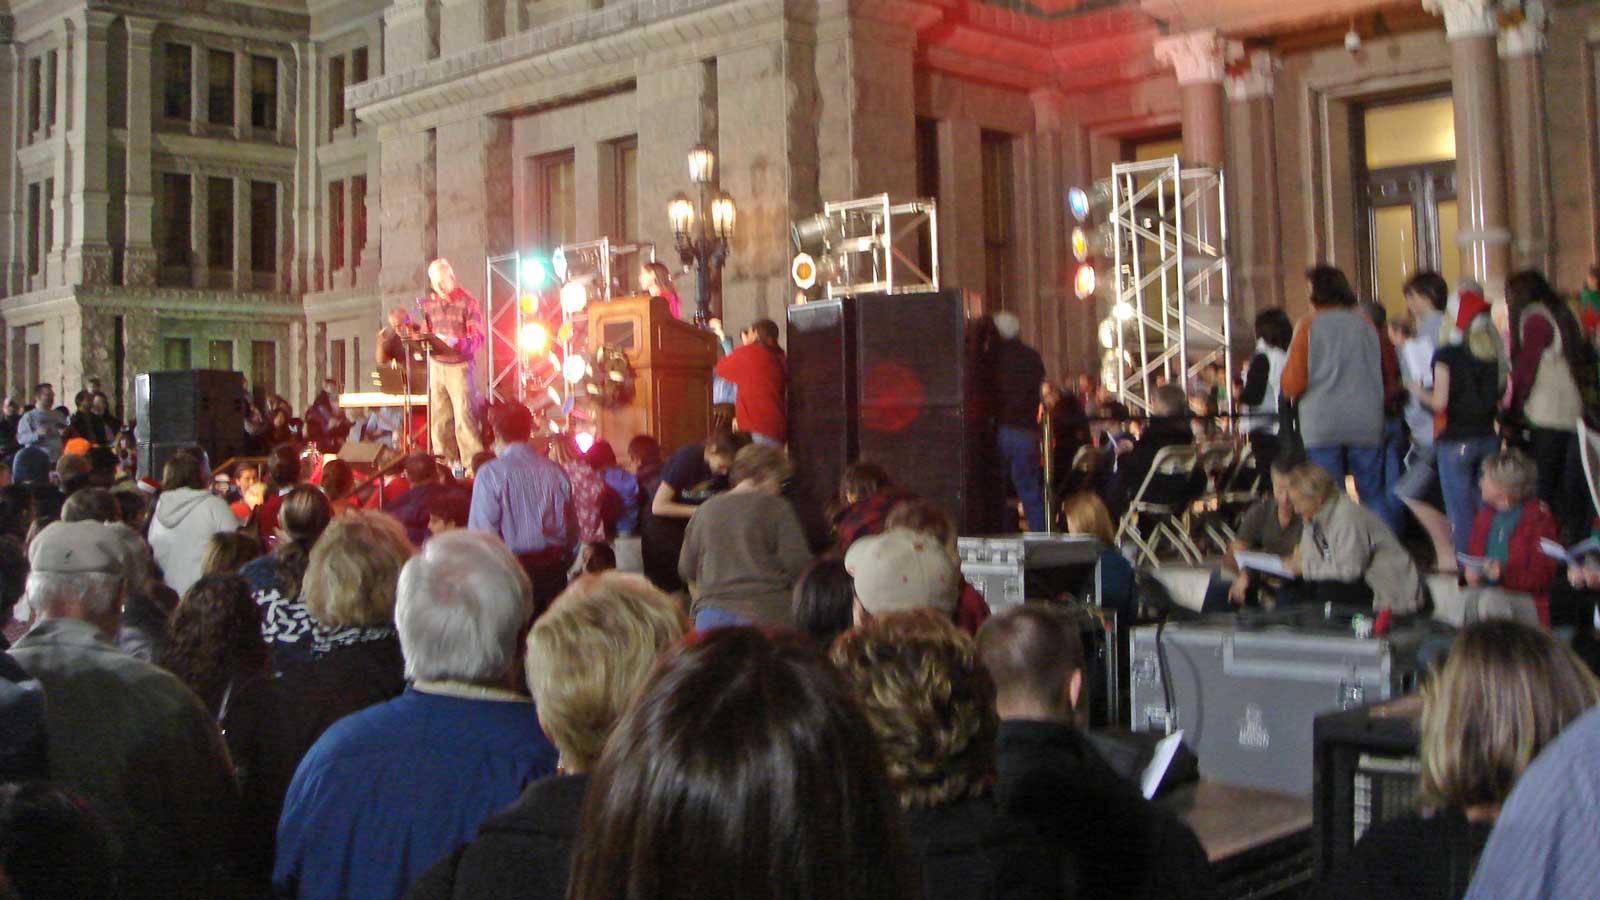 Crowds singing Christmas songs at the Texas State Capitol